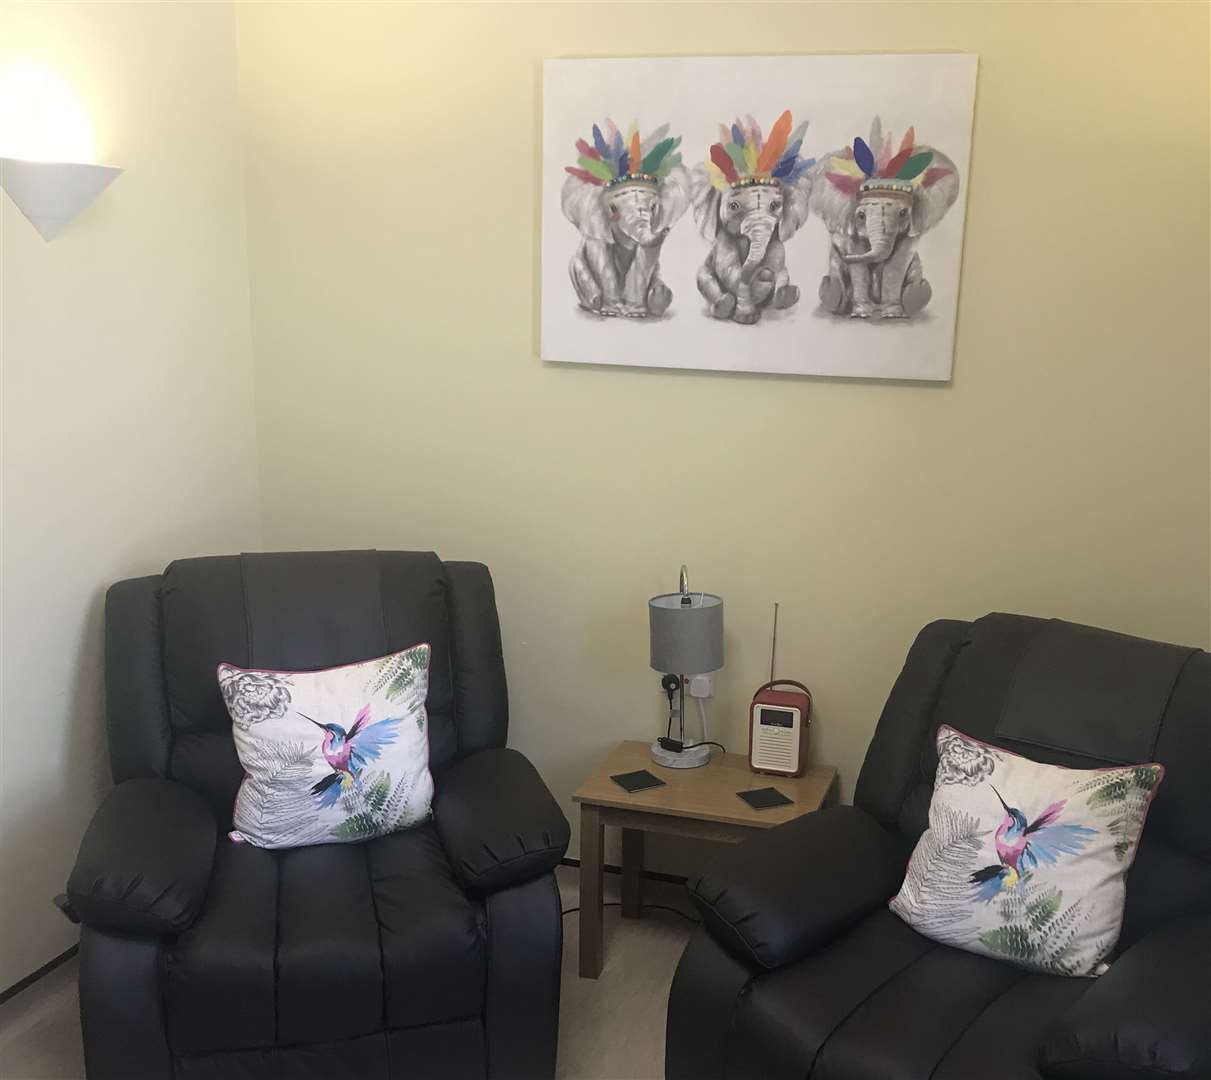 The ICU relatives' room has been spruced-up thanks to donations from NHS worker Debbie Stanfield and two of her friends